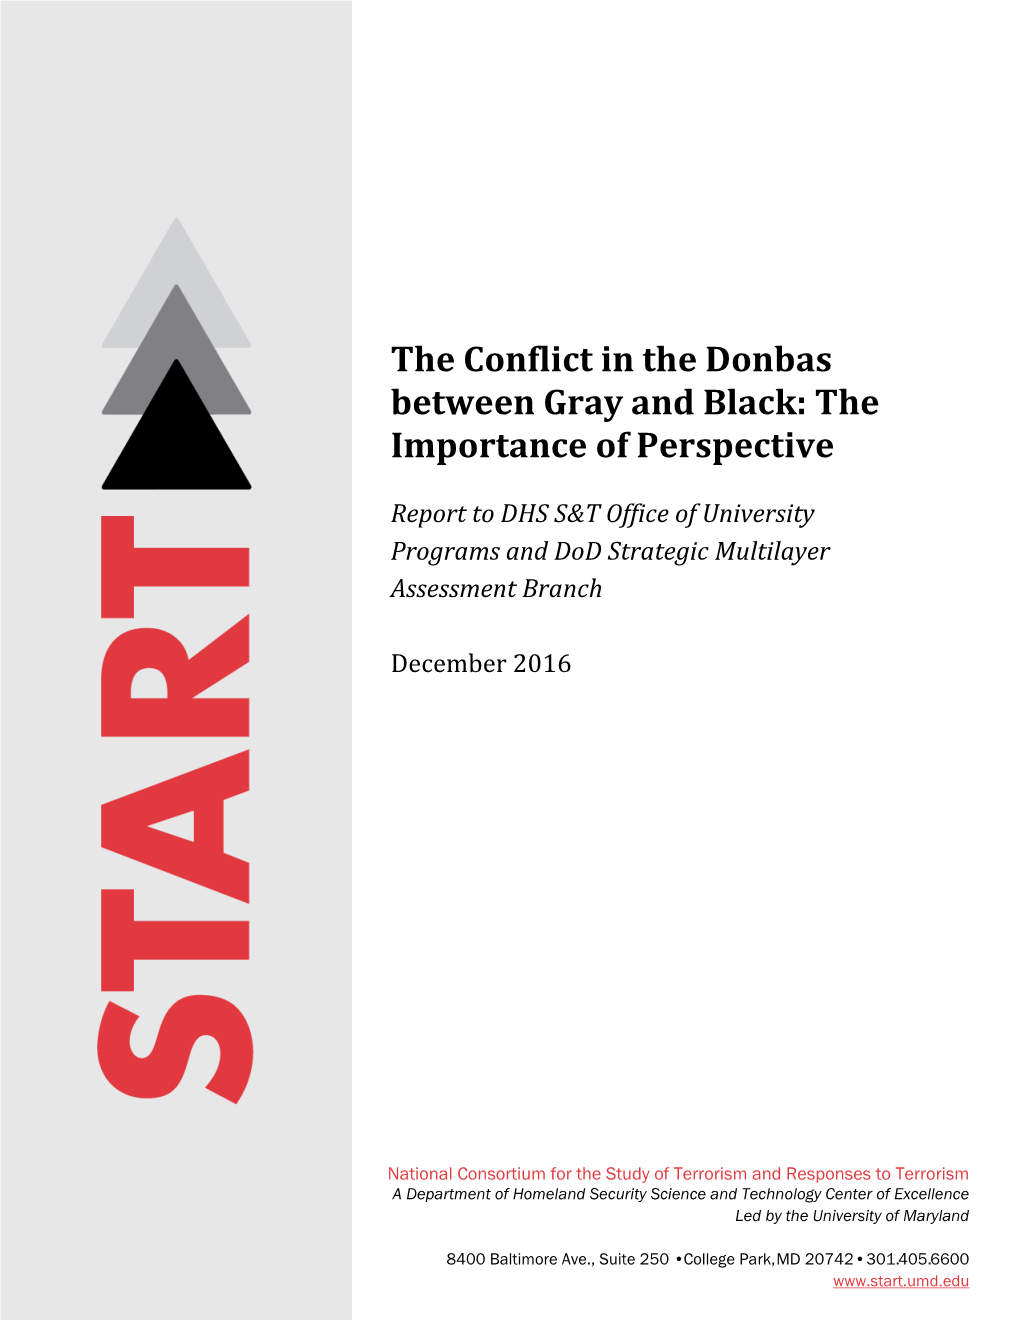 The Conflict in the Donbas Between Gray and Black: the Importance of Perspective